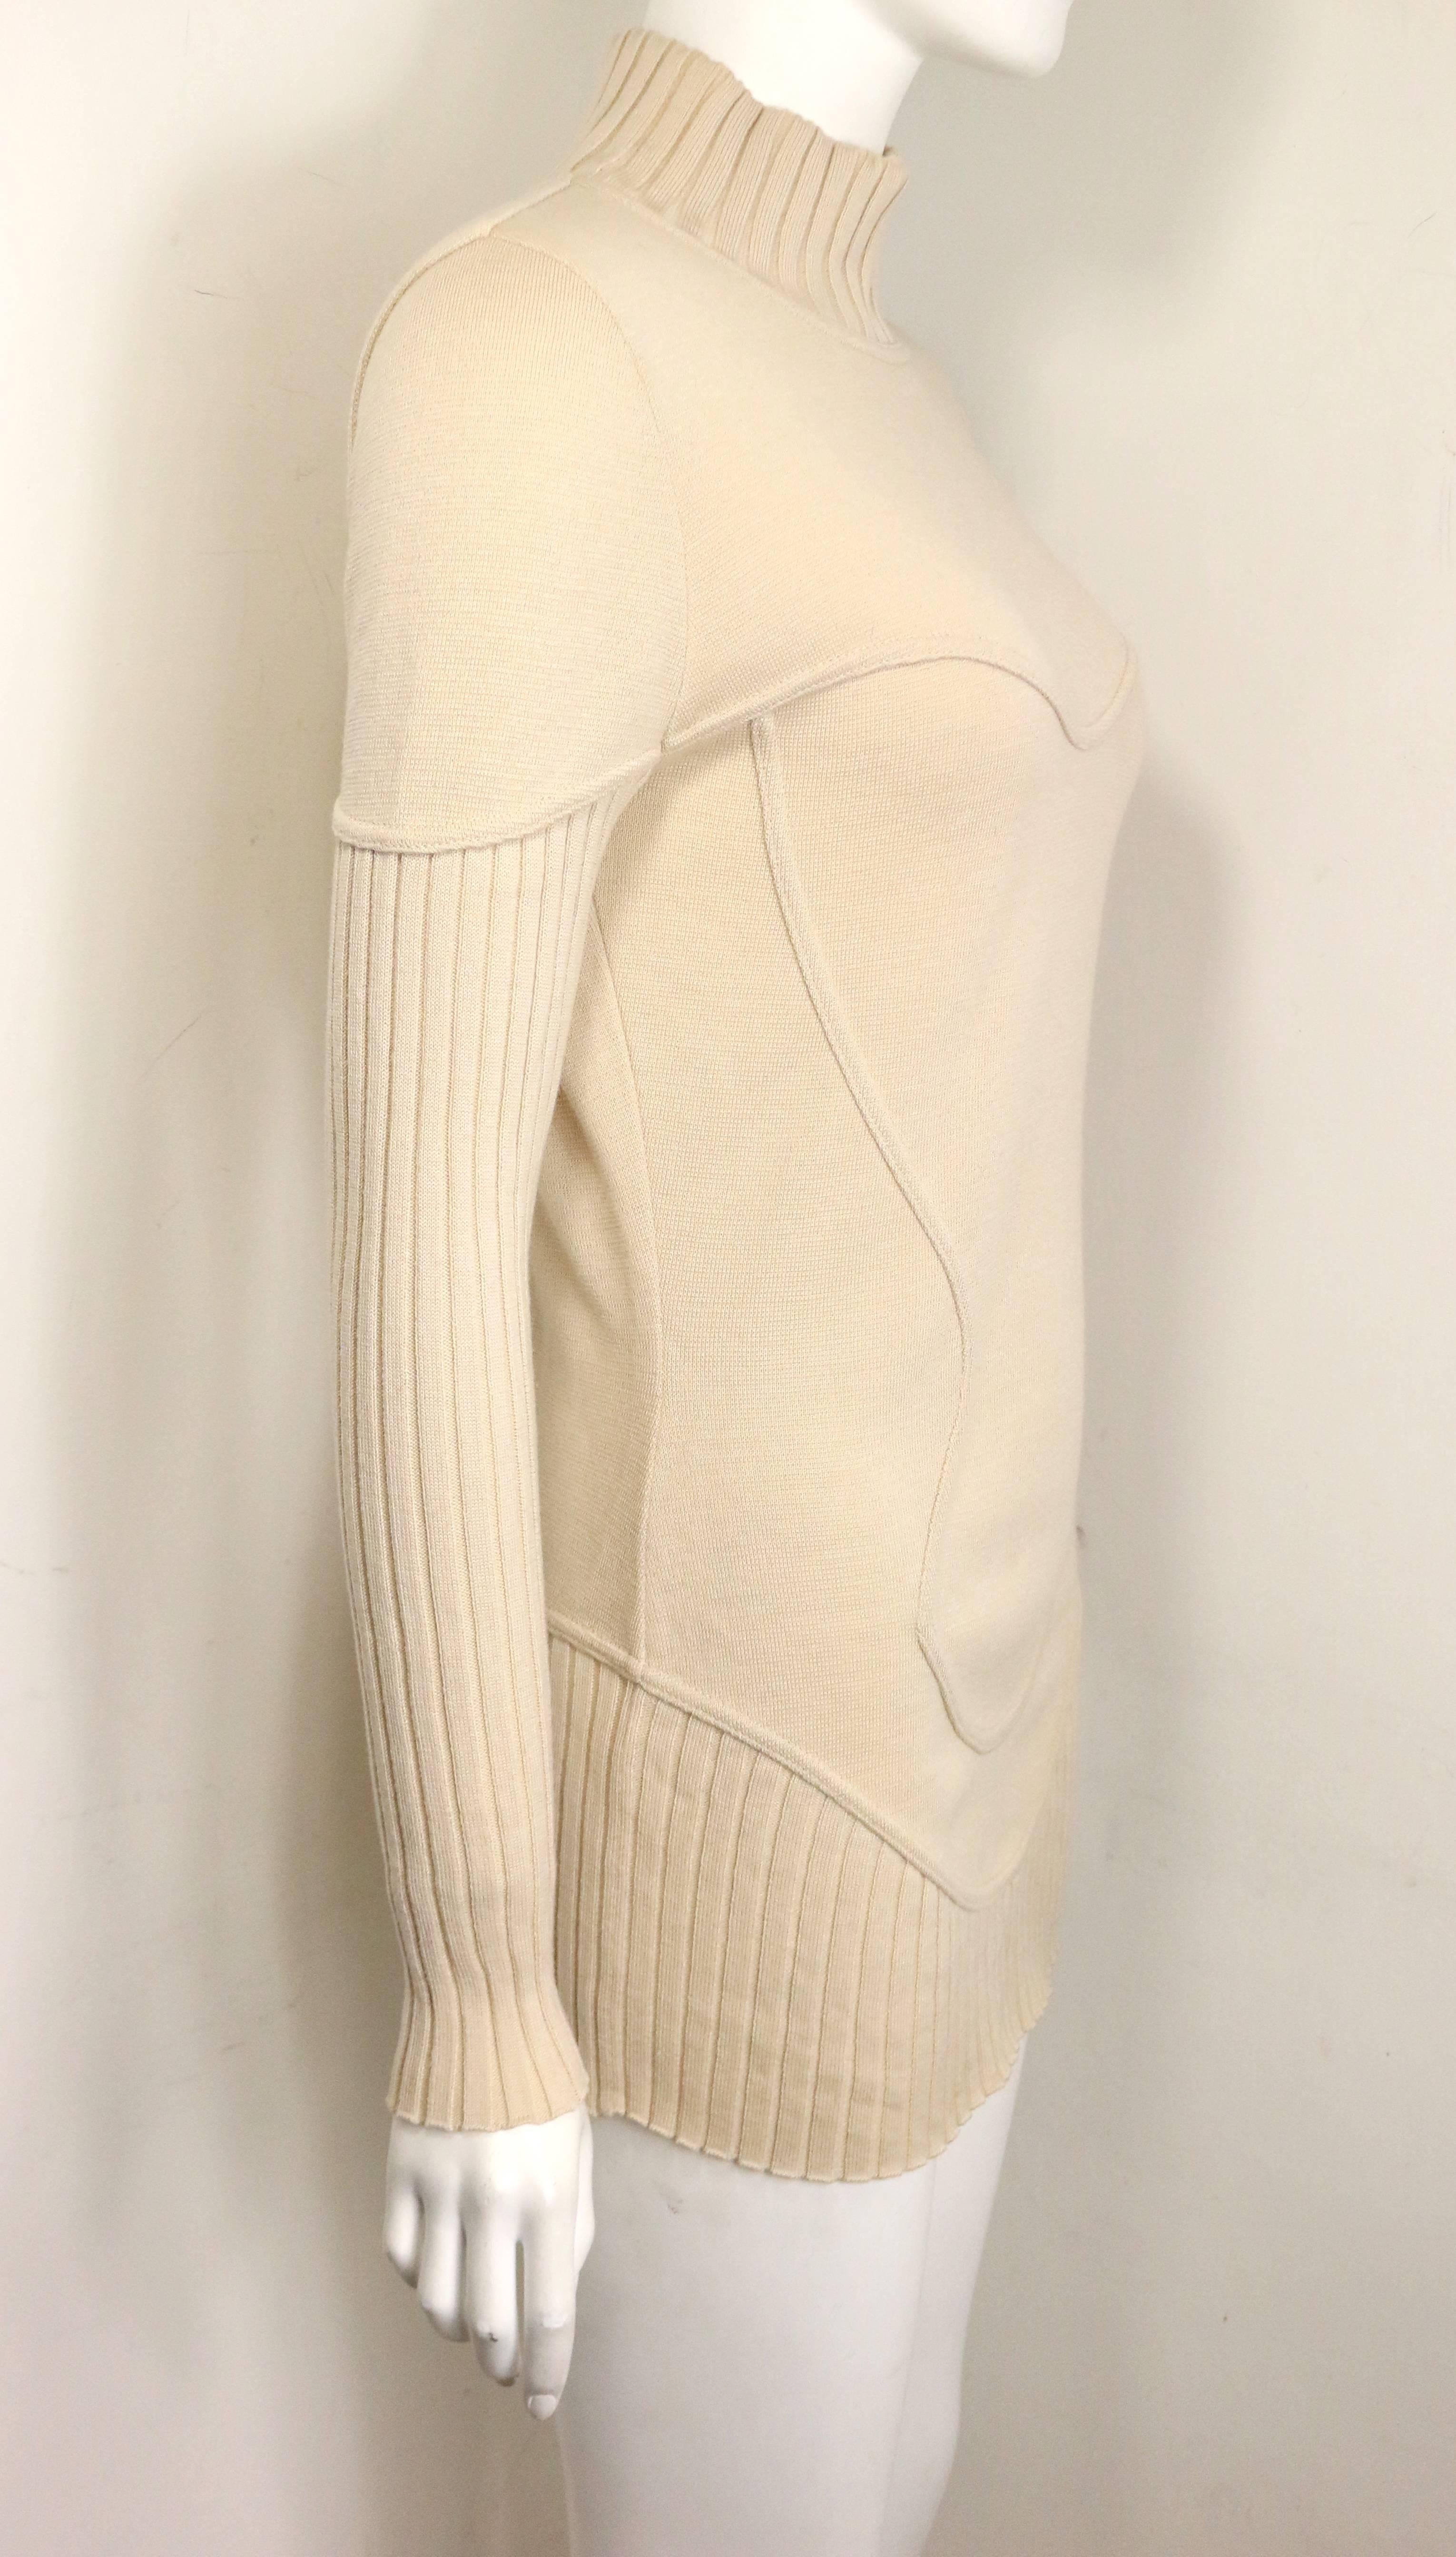 - Vintage 90s Mugler by Thierry Mugler light beige mock neck wool pullover sweater. Featuring ribbed neck, sleeves and hem. A very details design sweater. 

- Made in Italy. 

- Size 42. 

- 100% Wool. 

- Bust: 32 inches. Shoulder: 14inches.